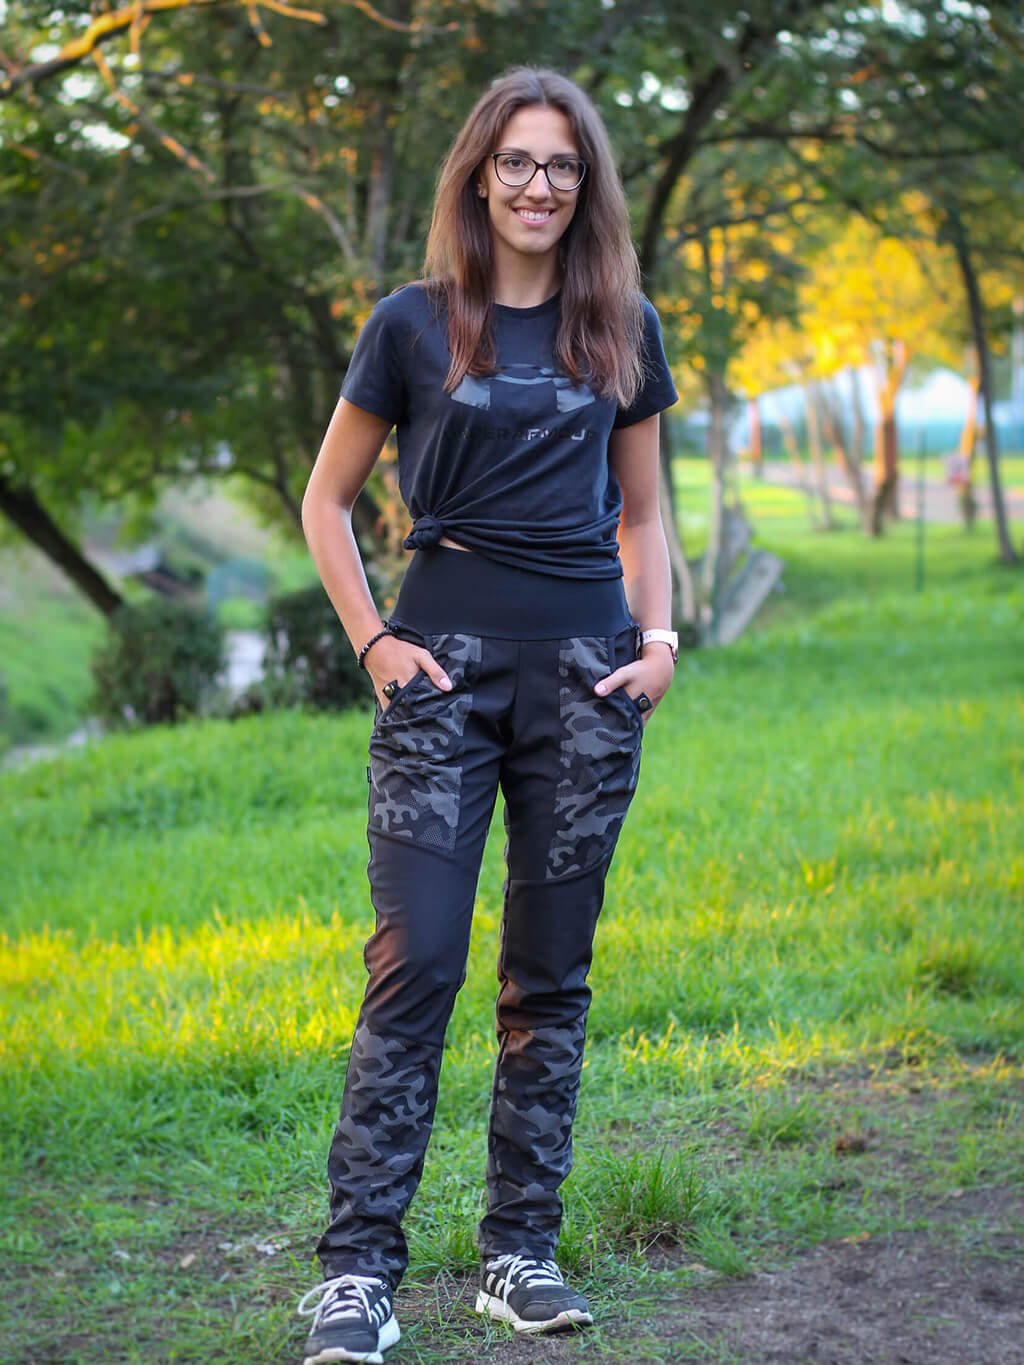 Women's training trousers WINTER - black reflective camouflage